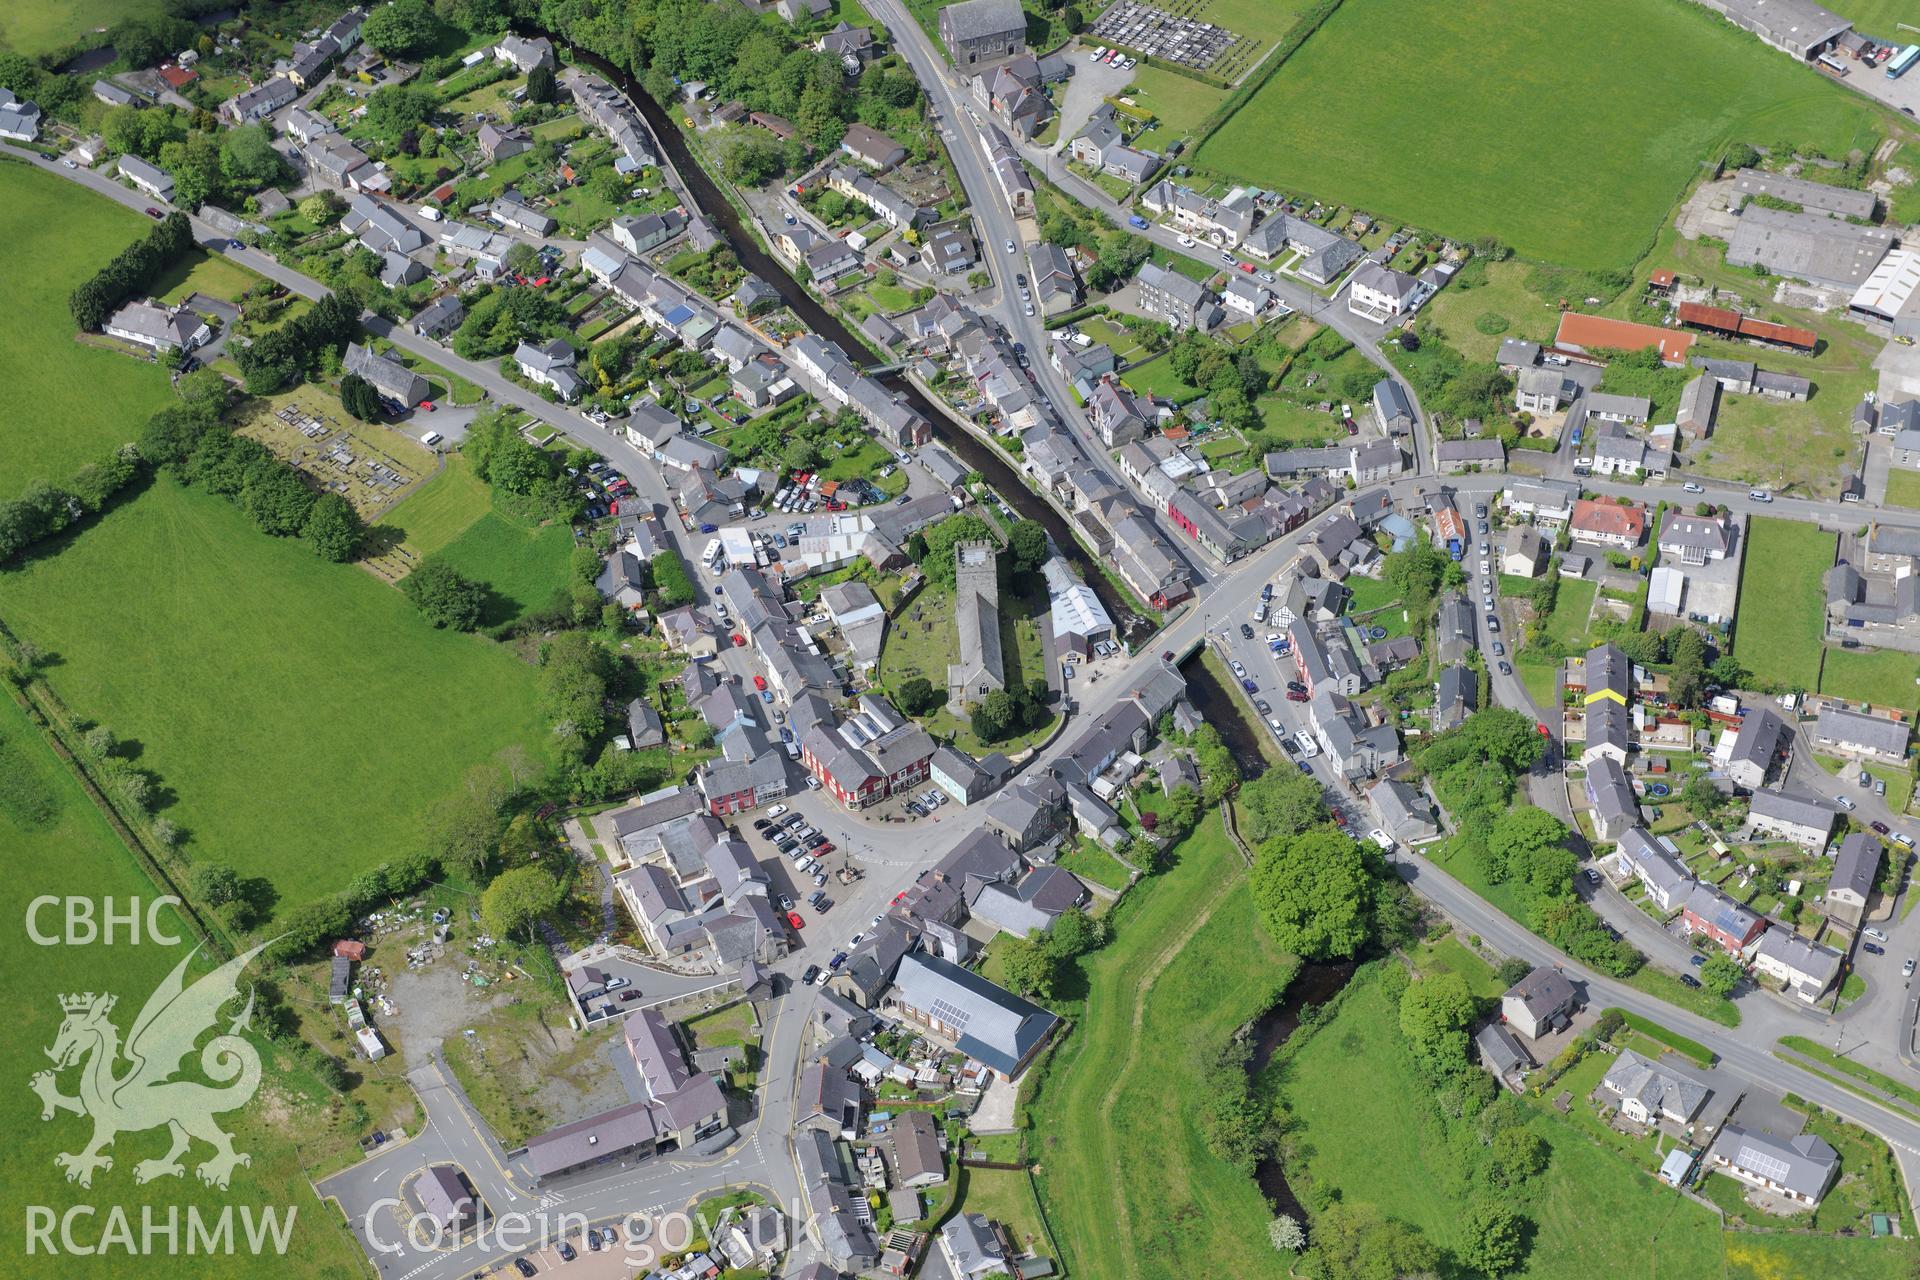 St Caron's Church and Tregaron Bridge, Tregaron. Oblique aerial photograph taken during the Royal Commission's programme of archaeological aerial reconnaissance by Toby Driver on 3rd June 2015.